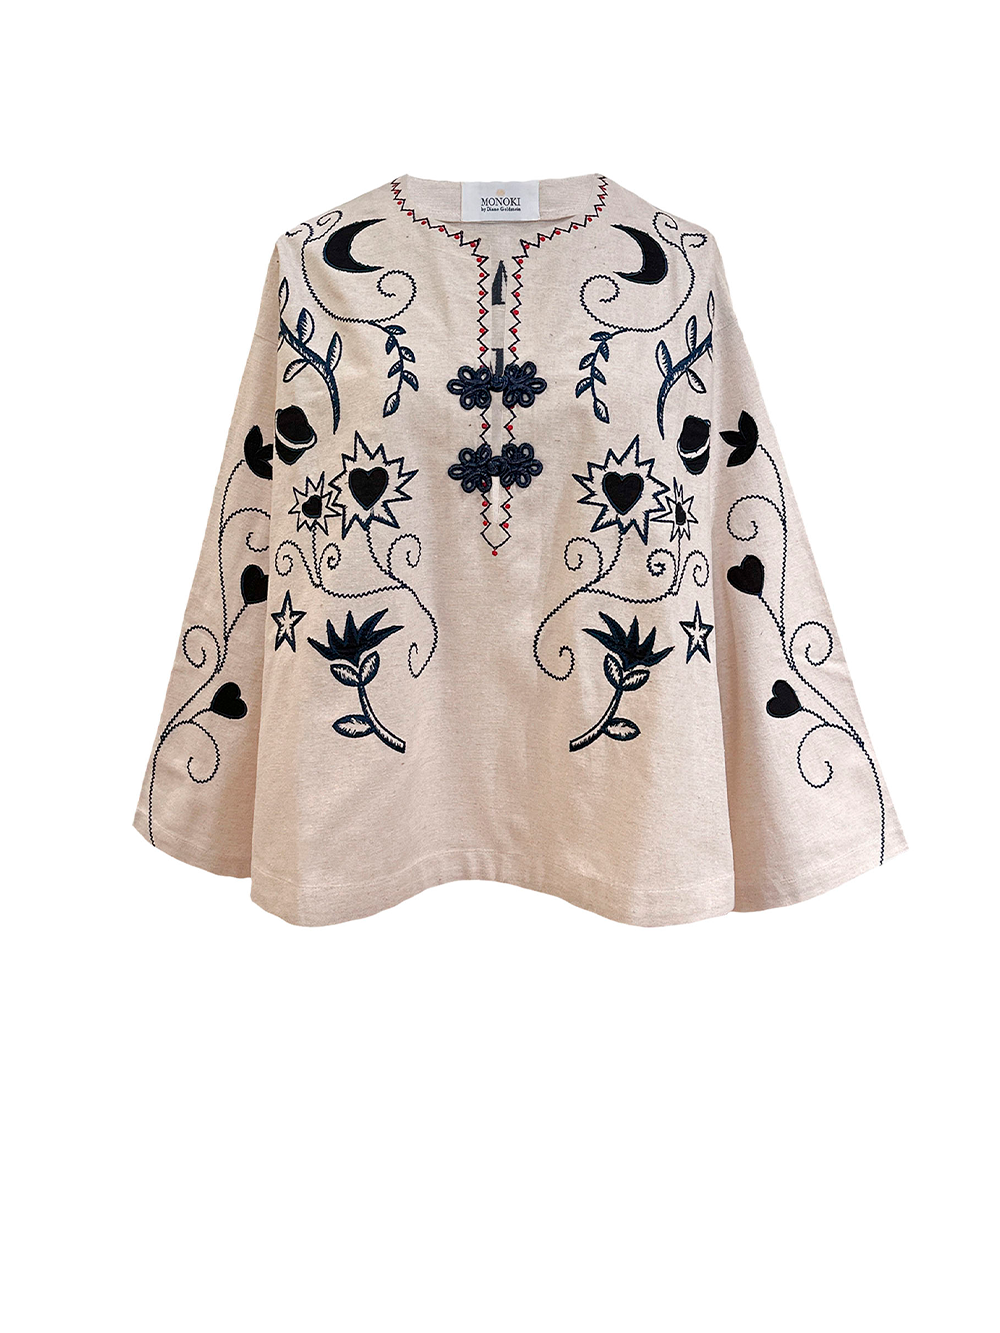 WHITE EMBROIDERED BASIL BLOUSE